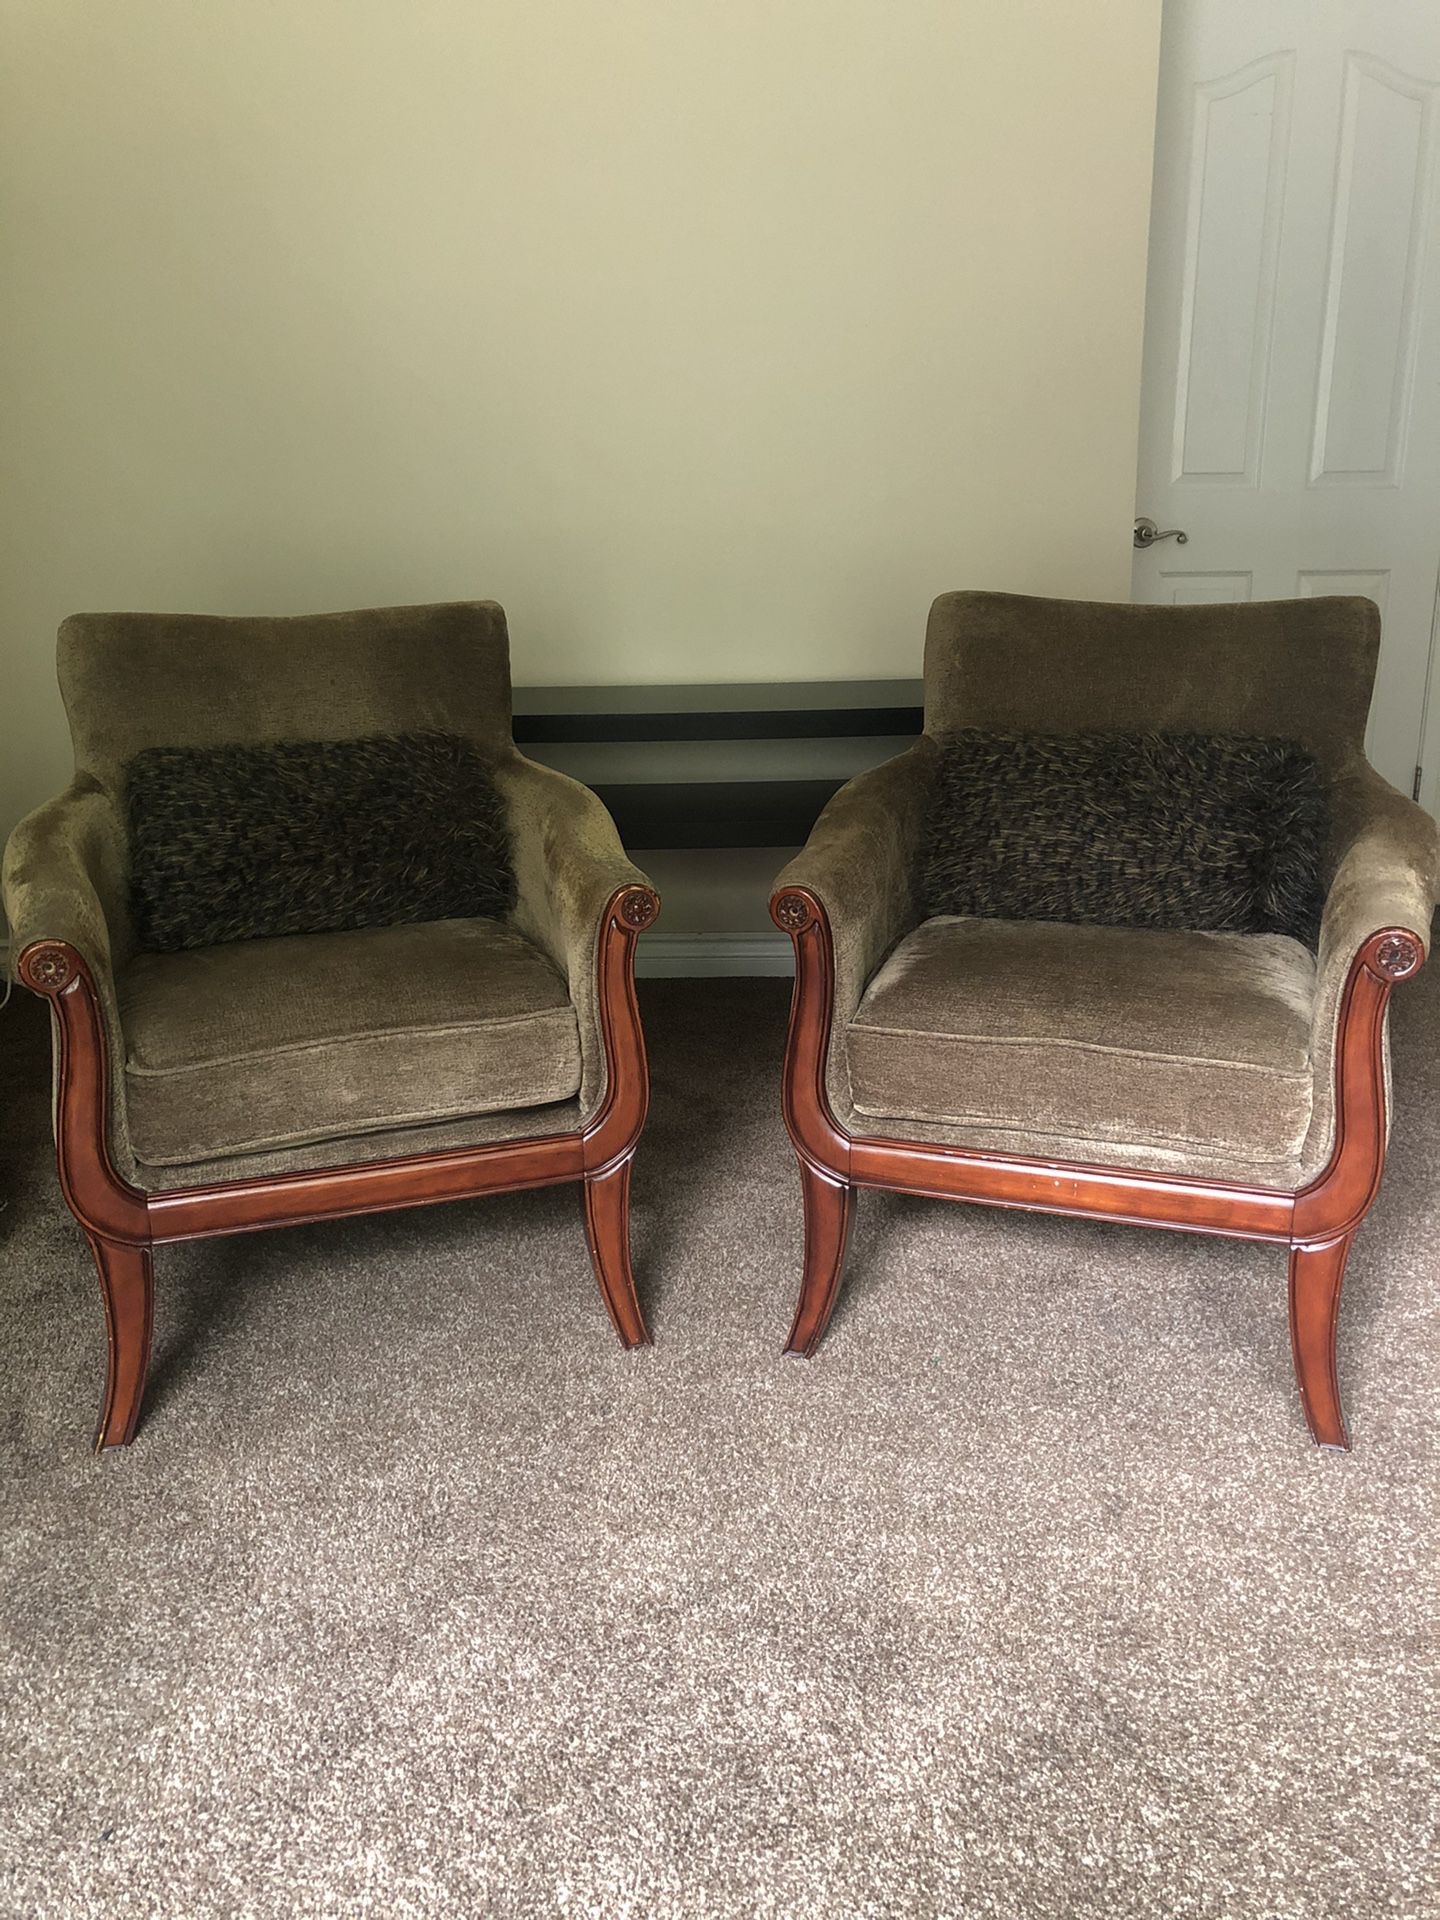 2 Accent Chairs For Sale - Good Condition $80 For Both